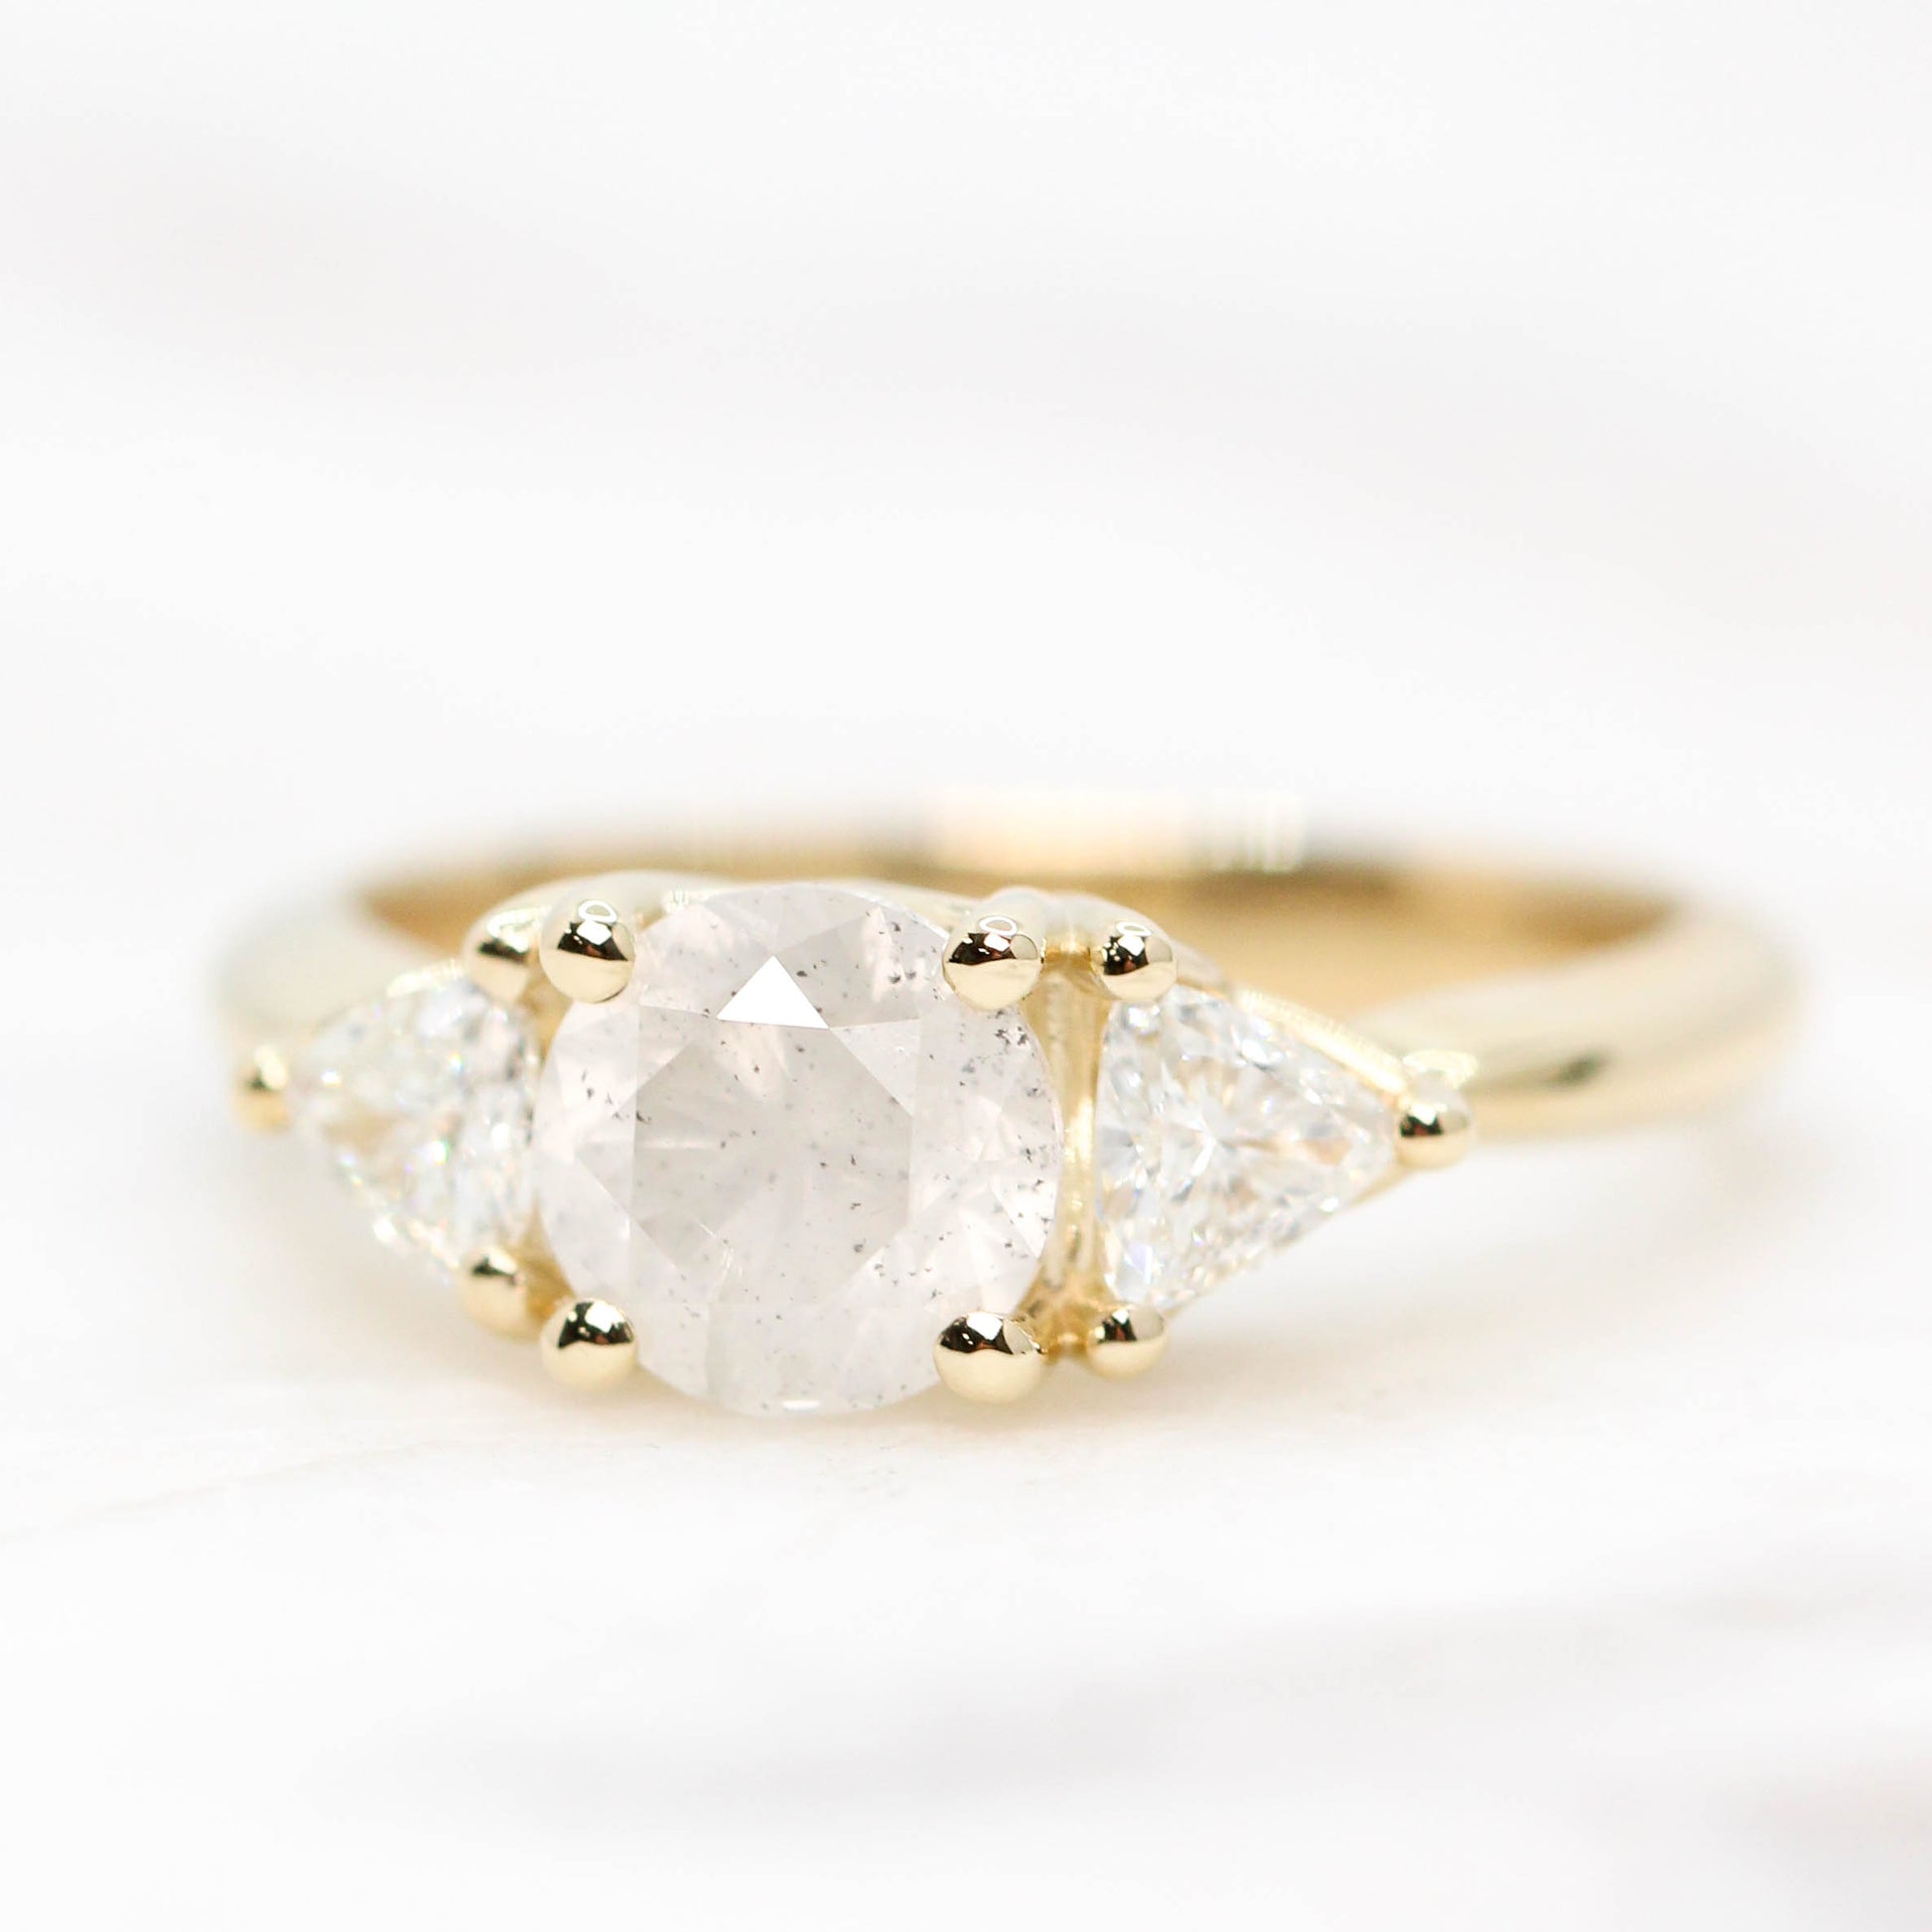 Nolen Ring with a 1.23 Carat White Celestial Diamond and White Accent Diamonds in 14k Yellow Gold - Ready to Size and Ship - Midwinter Co. Alternative Bridal Rings and Modern Fine Jewelry